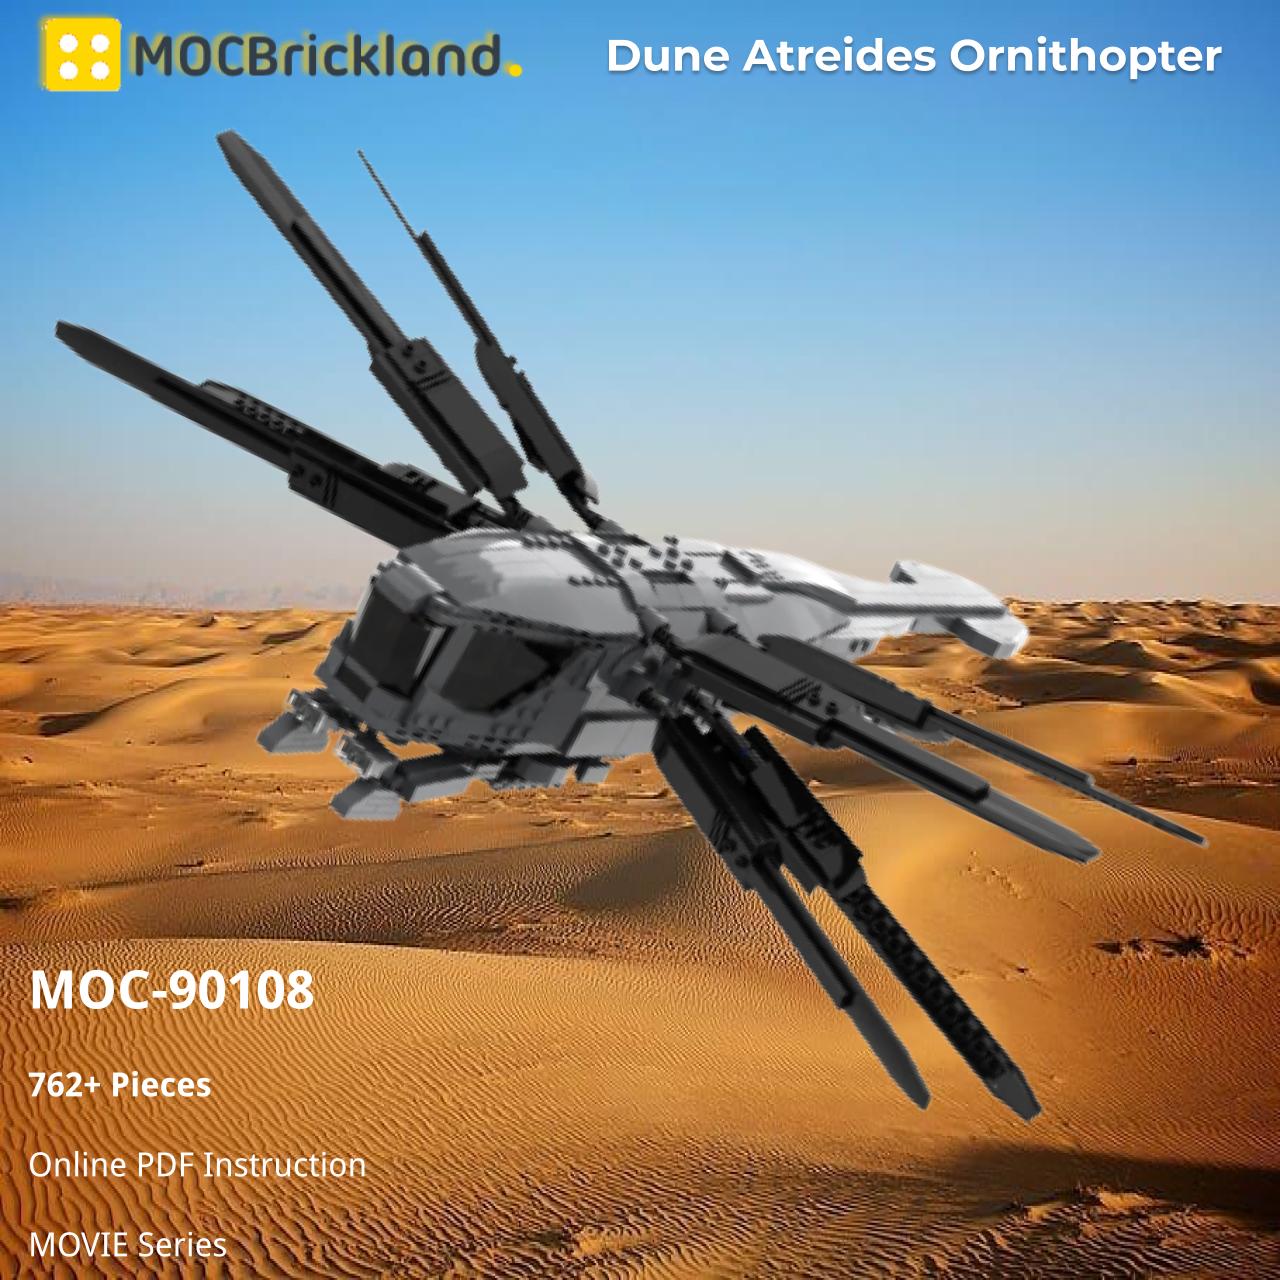 Dune Atreides Ornithopter MOVIE MOC-90108 by Brick_boss_pdf WITH 762 PIECES